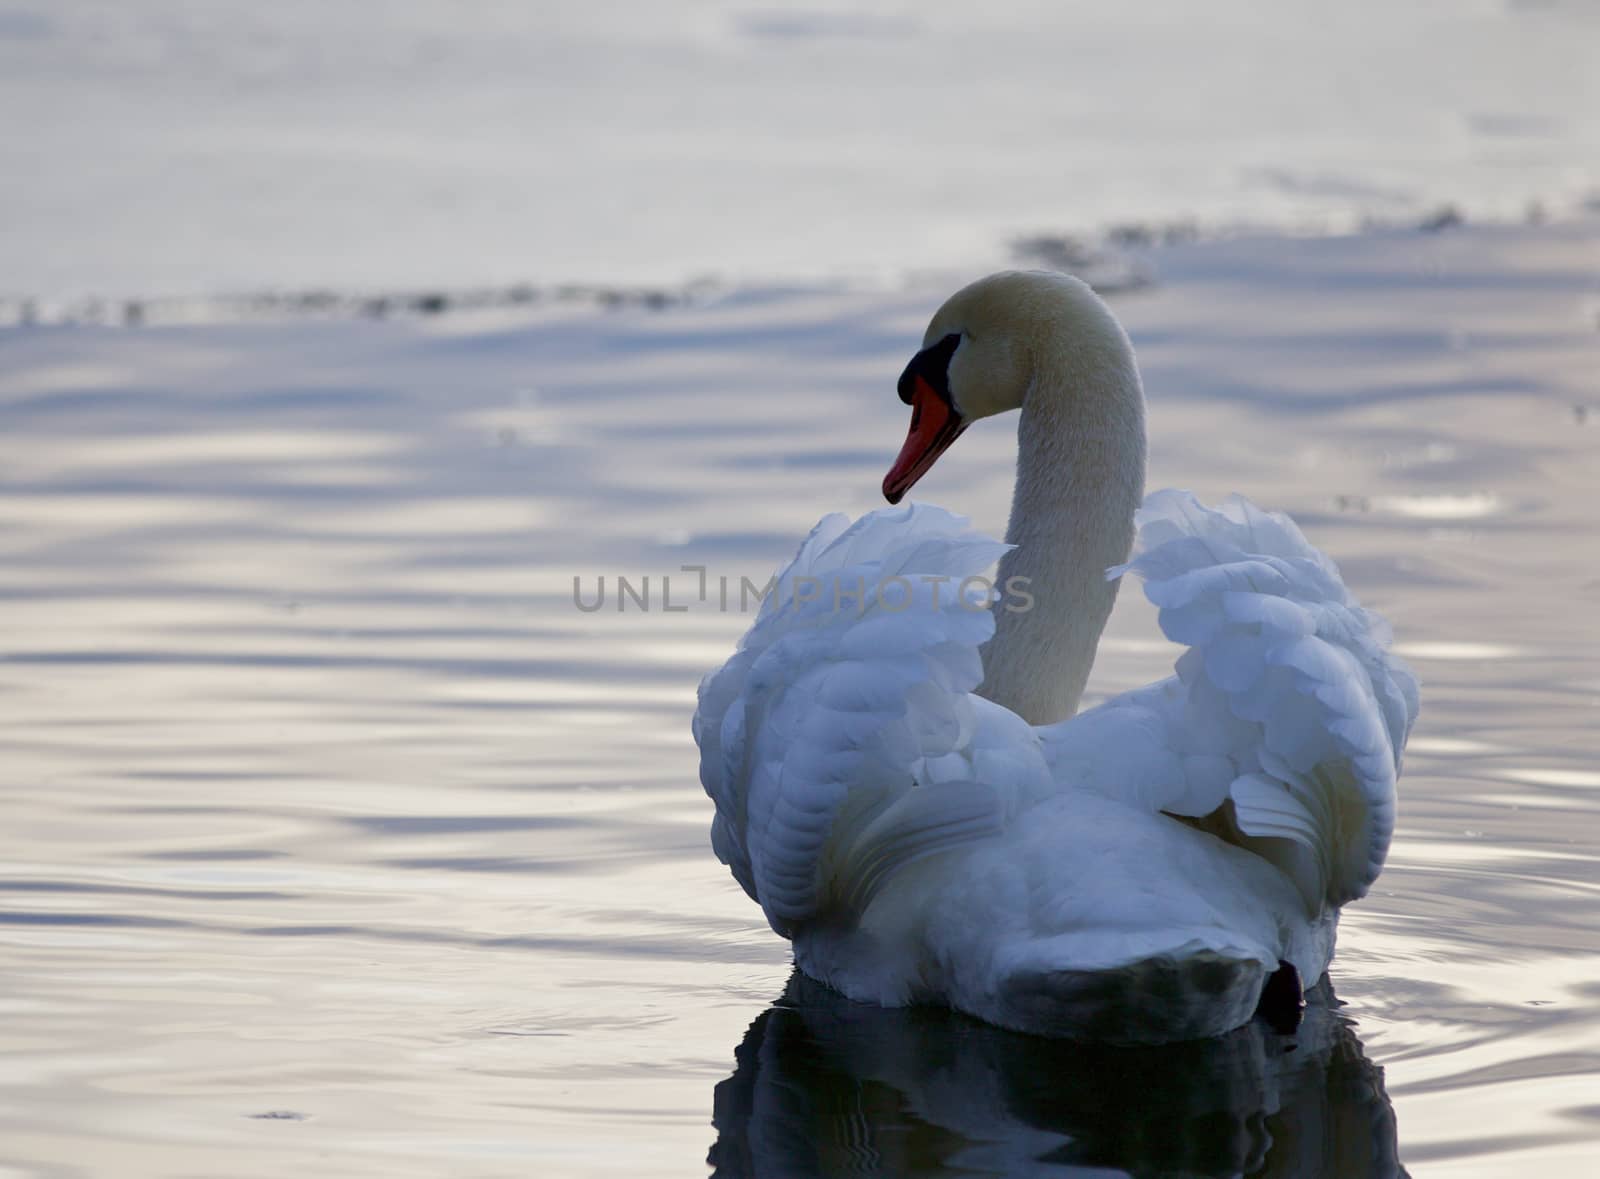 Beautiful picture with the mute swan in the lake